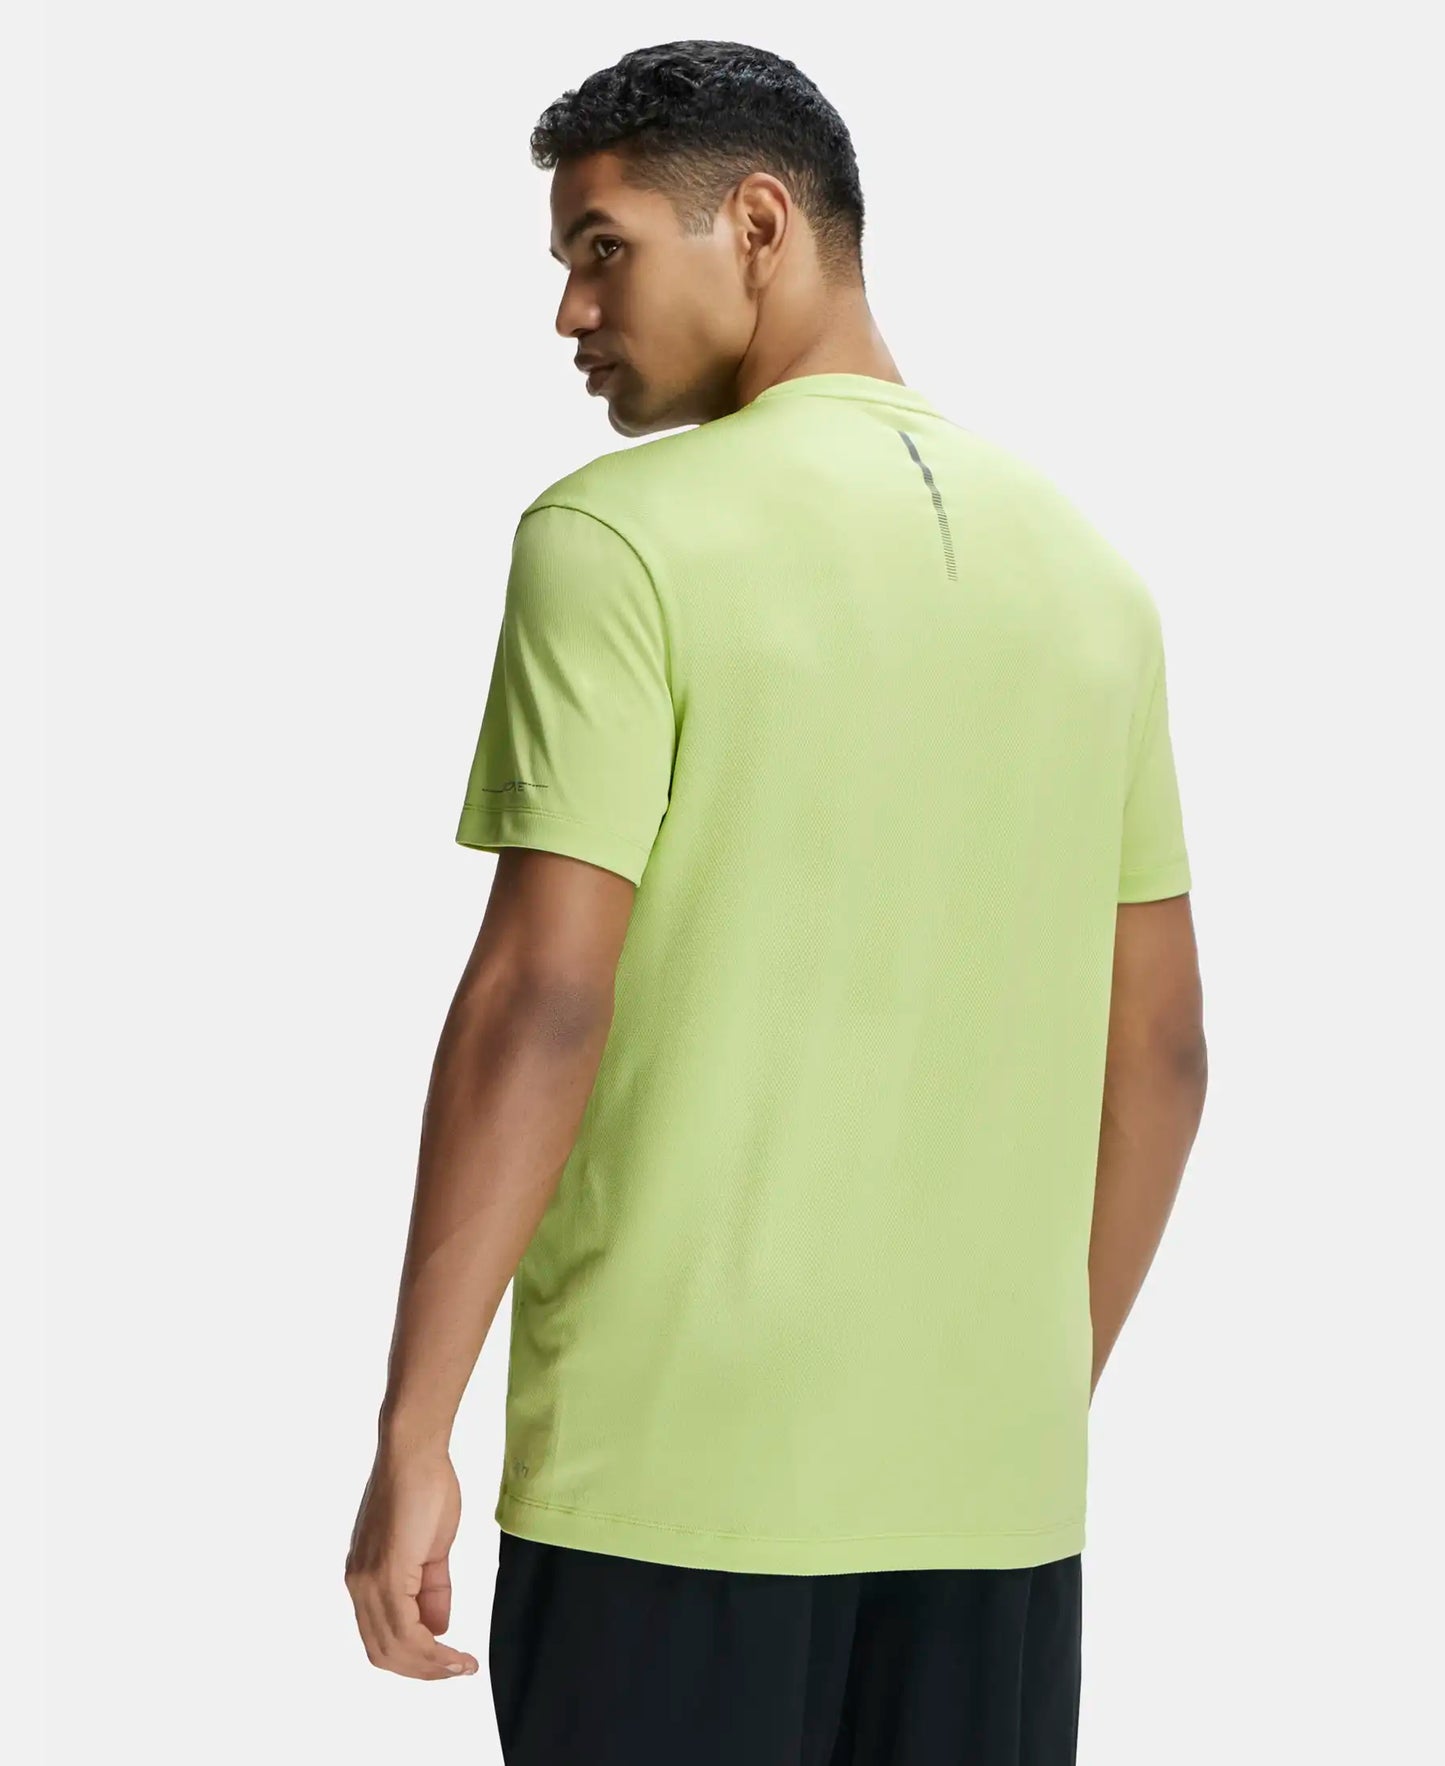 Recycled Microfiber Elastane Stretch Half Sleeve Round Neck T-Shirt with Breathable Mesh - Green Glow-3